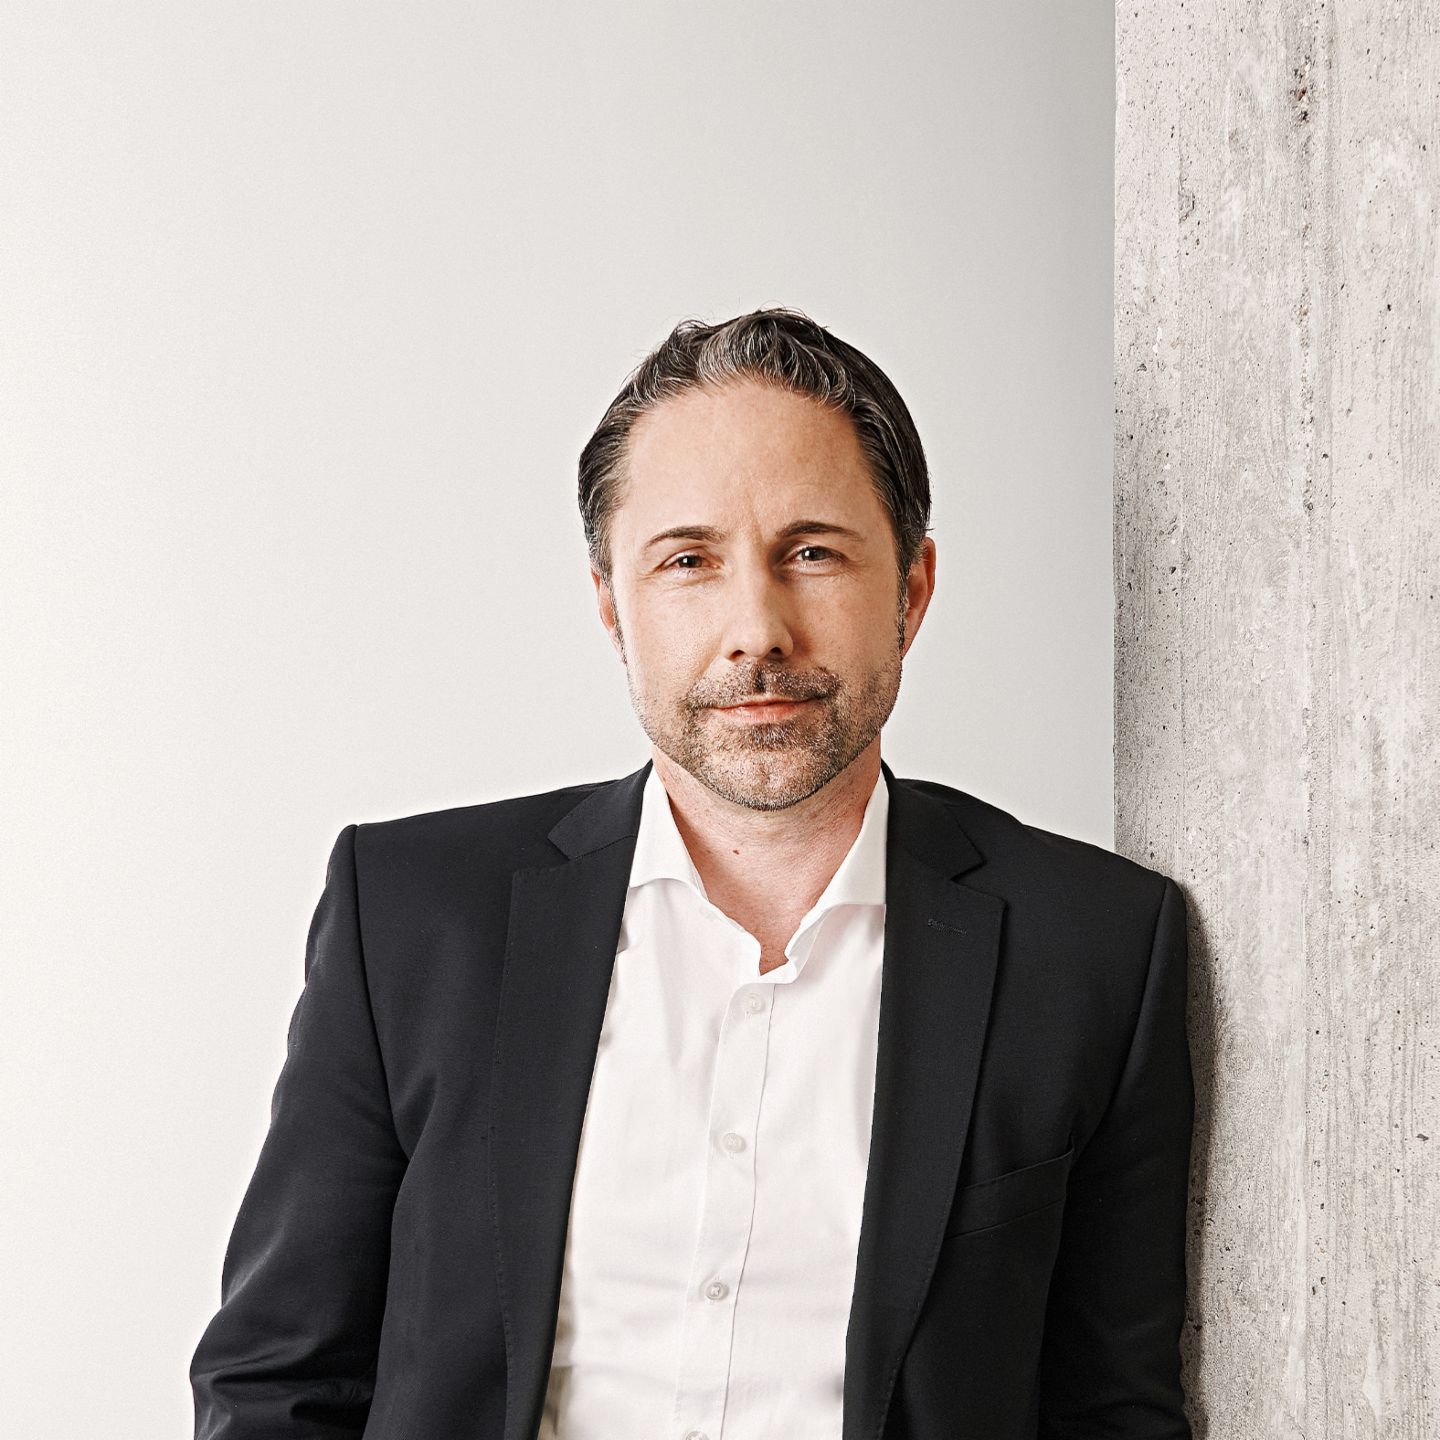 Marwin Ramcke, CEO of the EOS Group.